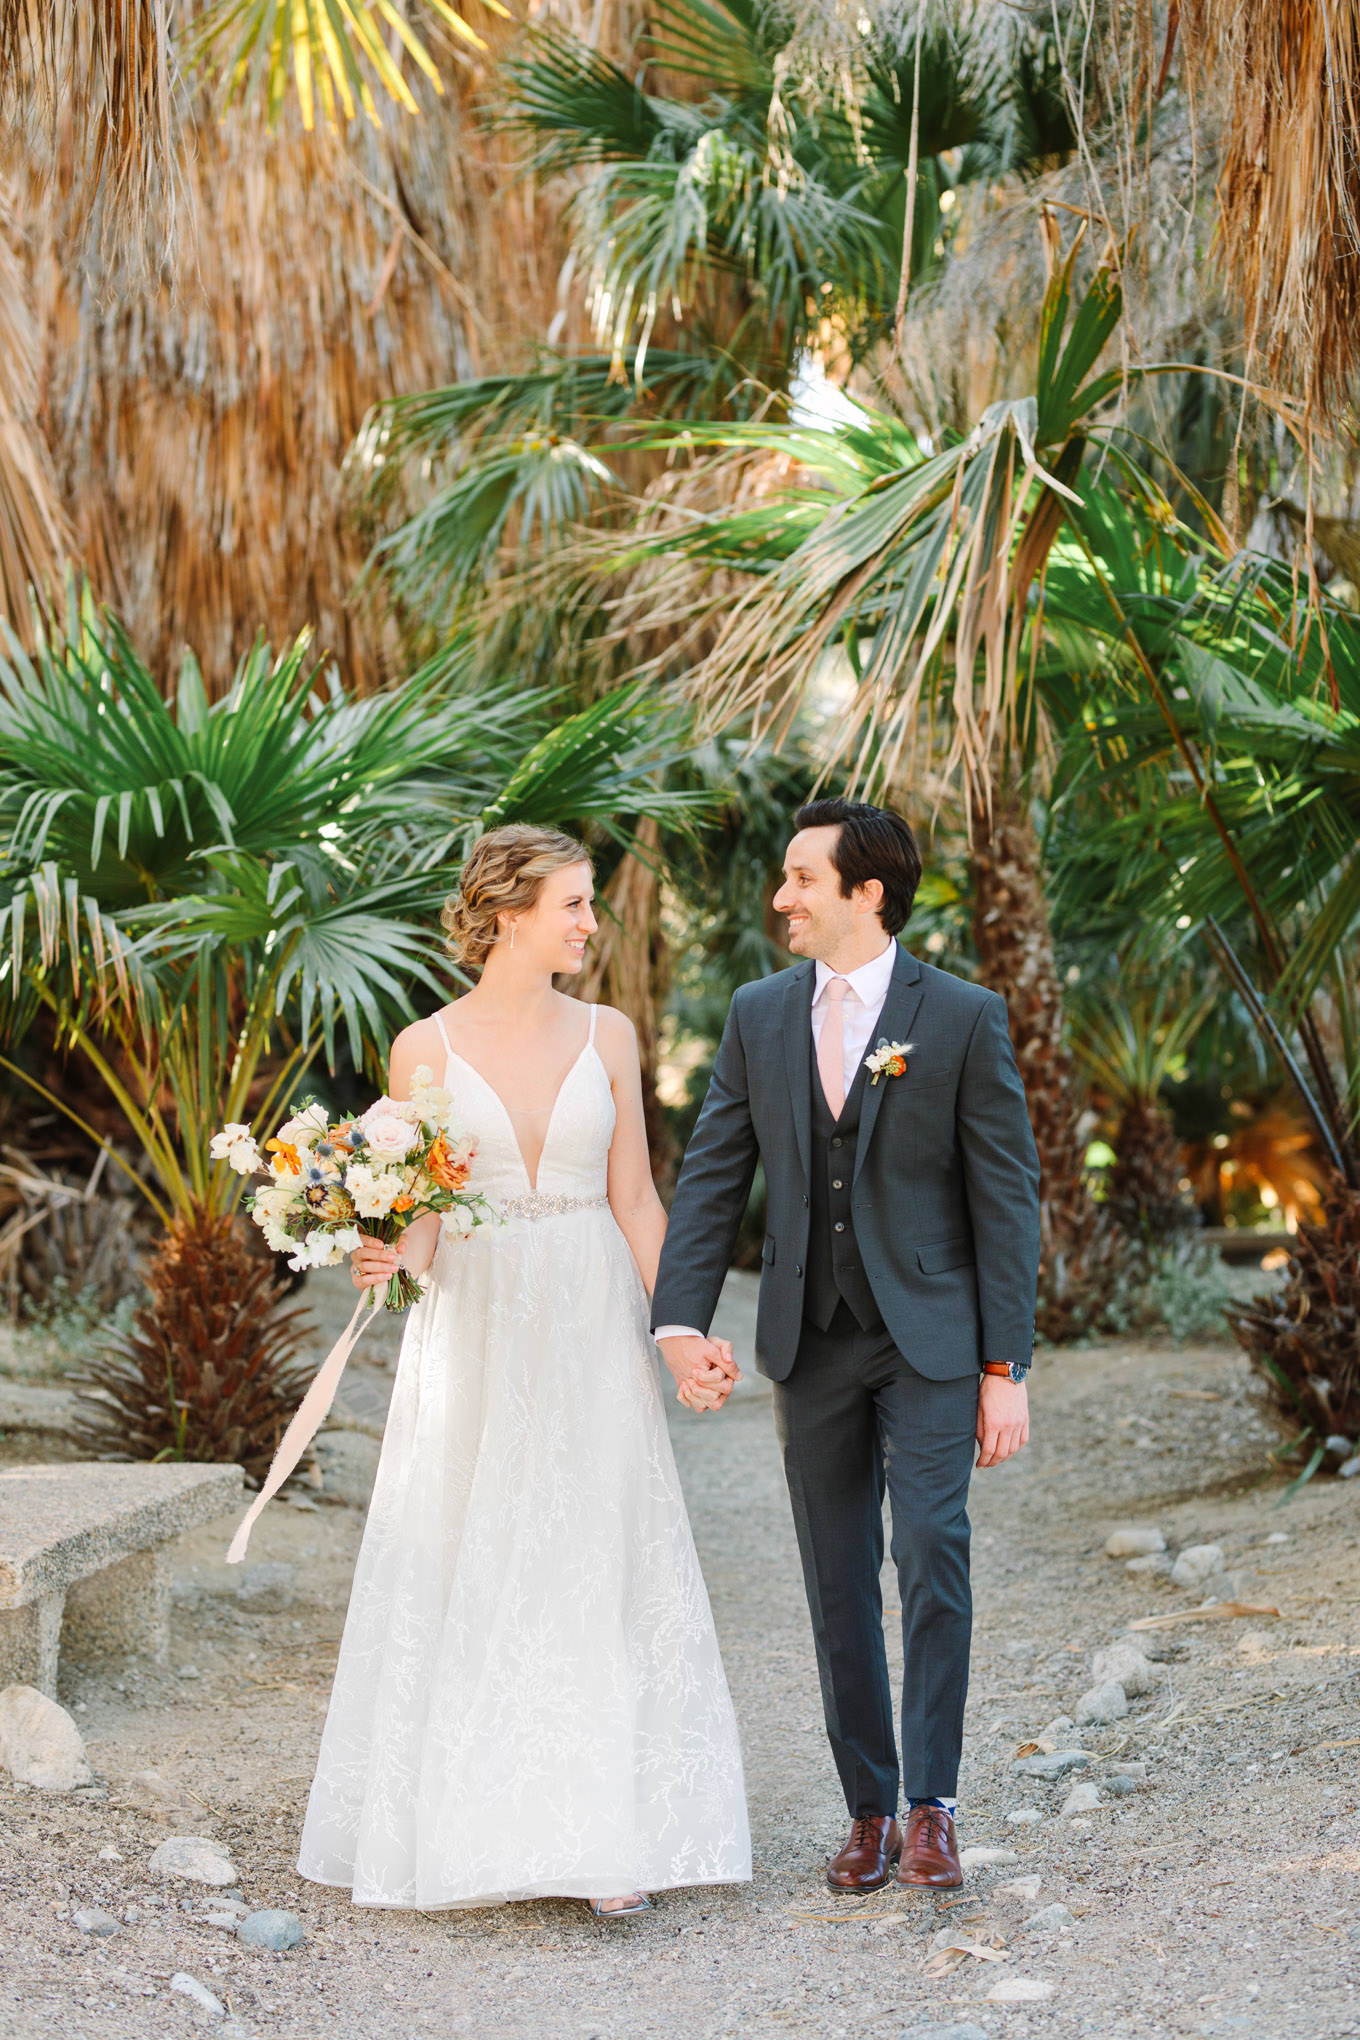 Wedding portrait of bride and groom walking in palm garden | Living Desert Zoo & Gardens wedding with unique details | Elevated and colorful wedding photography for fun-loving couples in Southern California |  #PalmSprings #palmspringsphotographer #gardenwedding #palmspringswedding  Source: Mary Costa Photography | Los Angeles wedding photographer 